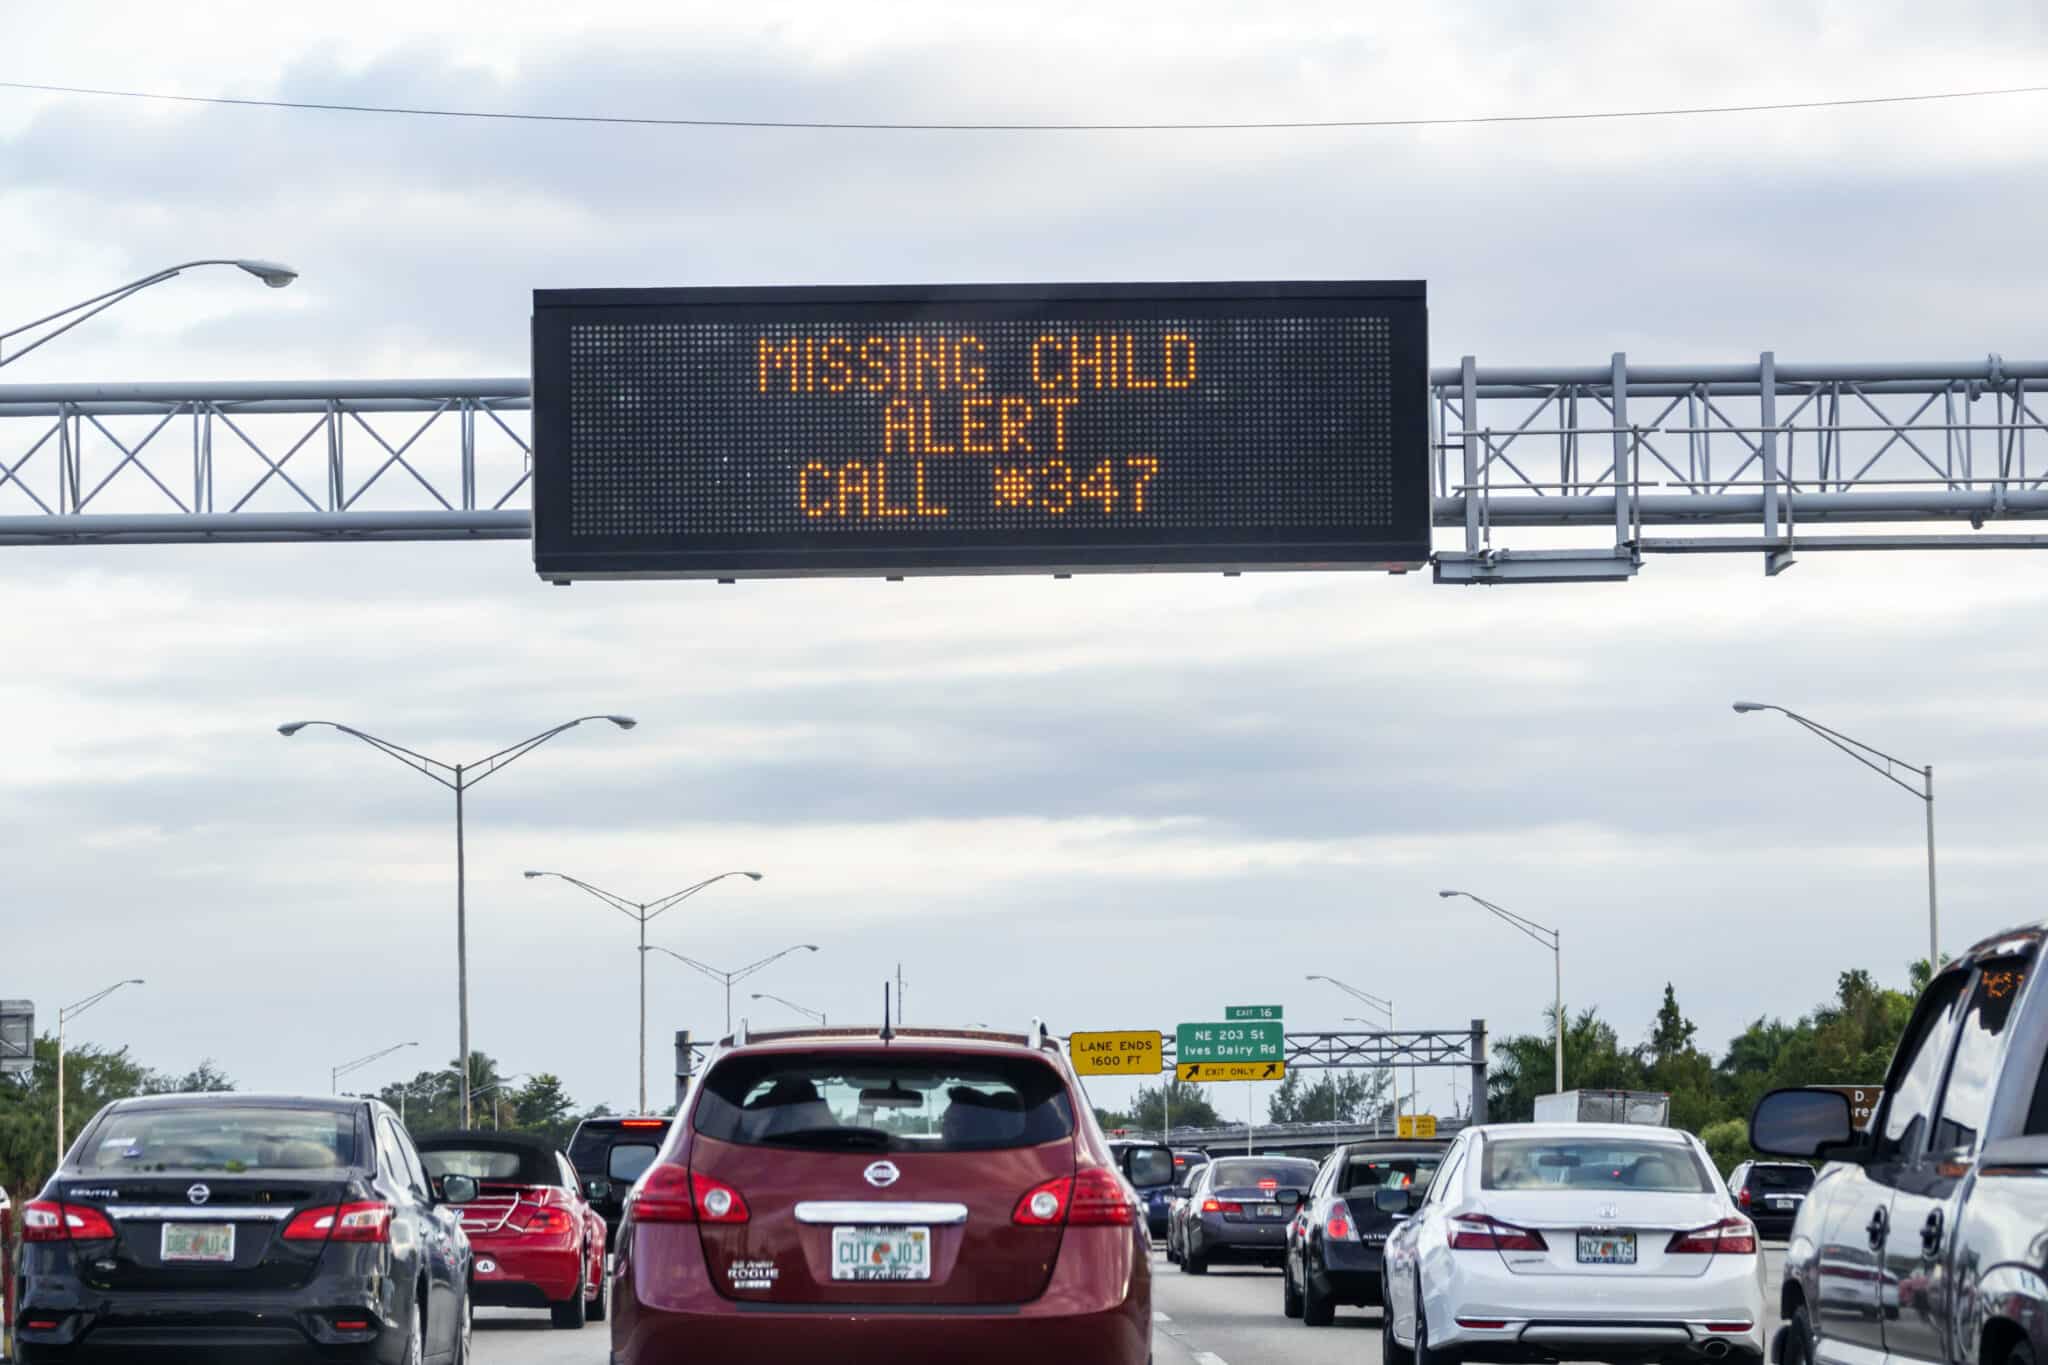 Miami, Interstate I-95, missing child alert. (Photo by: Jeffrey Greenberg/Universal Images Group via Getty Images)